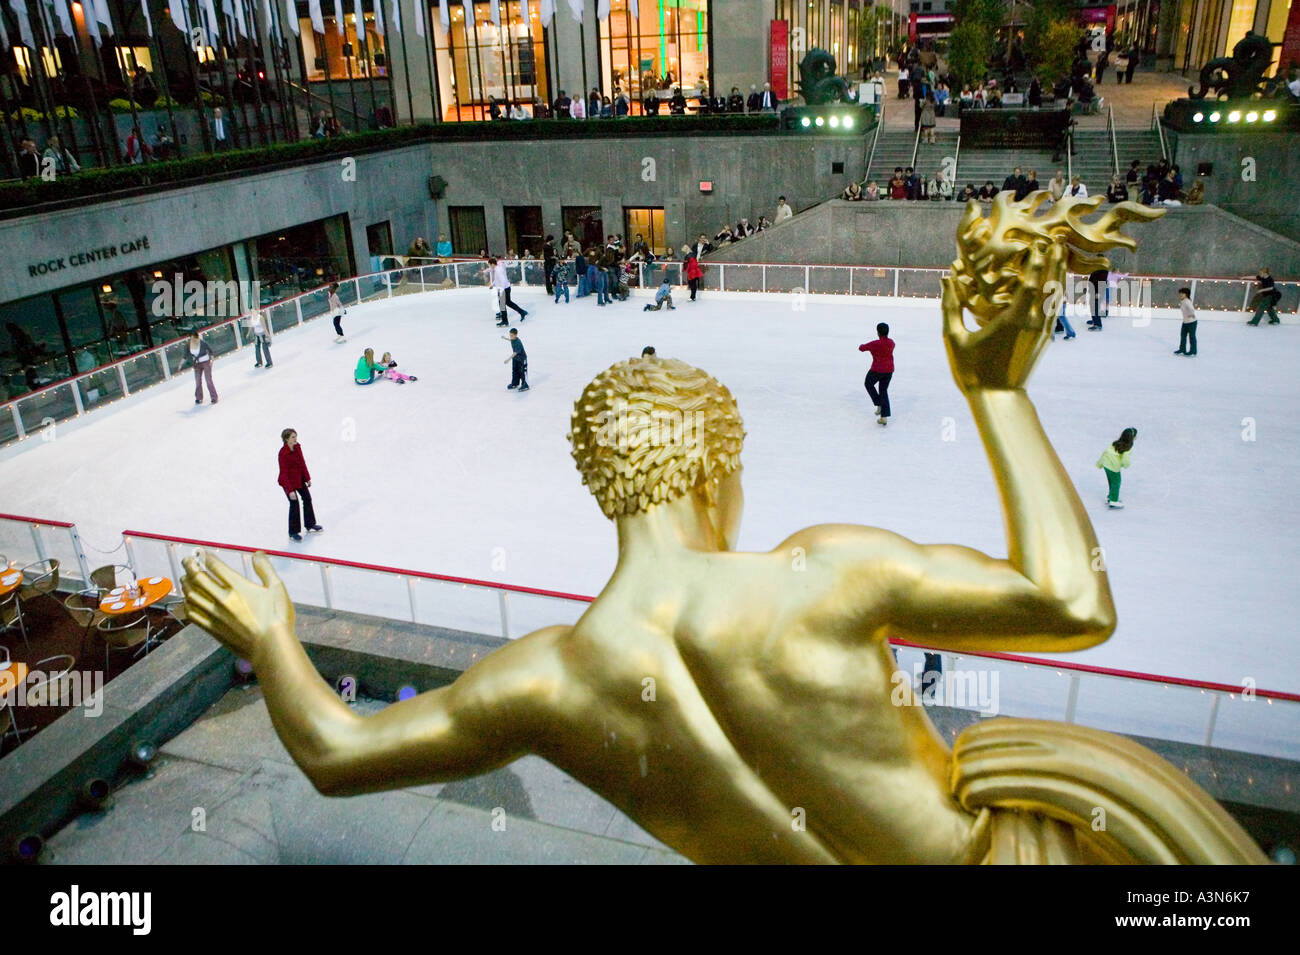 View of the skating rink at the Rockefeller Center Plaza in New York City USA October 2005 Stock Photo